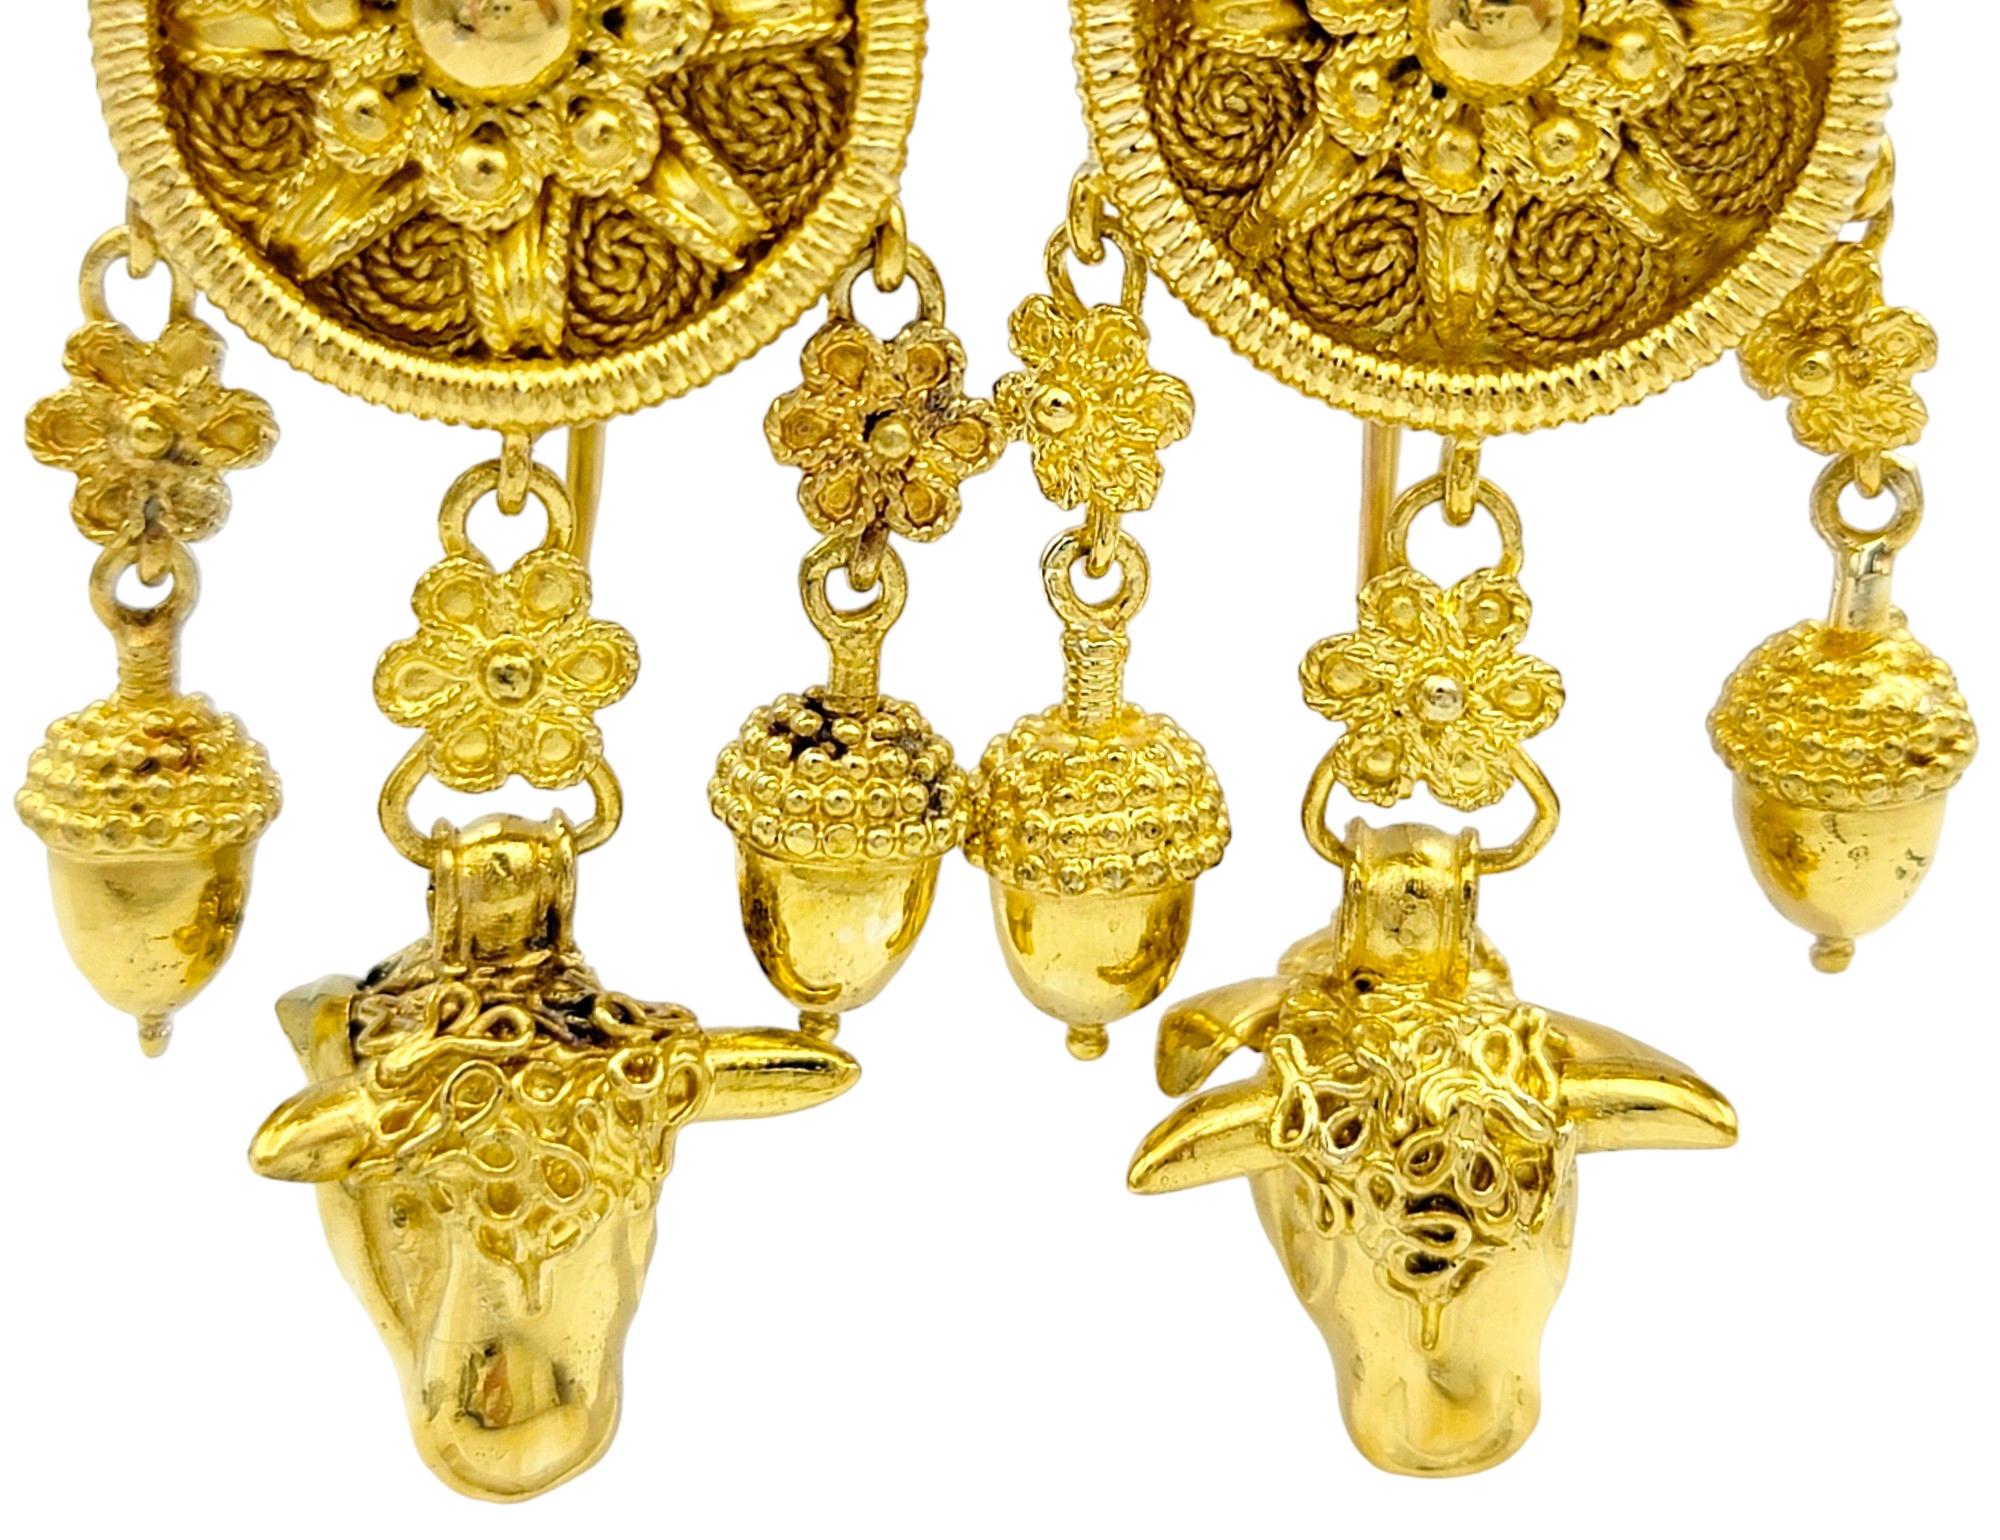 Dream Catcher Motif with Cow Head Dangle Earrings Set in 22 Karat Yellow Gold In Good Condition For Sale In Scottsdale, AZ